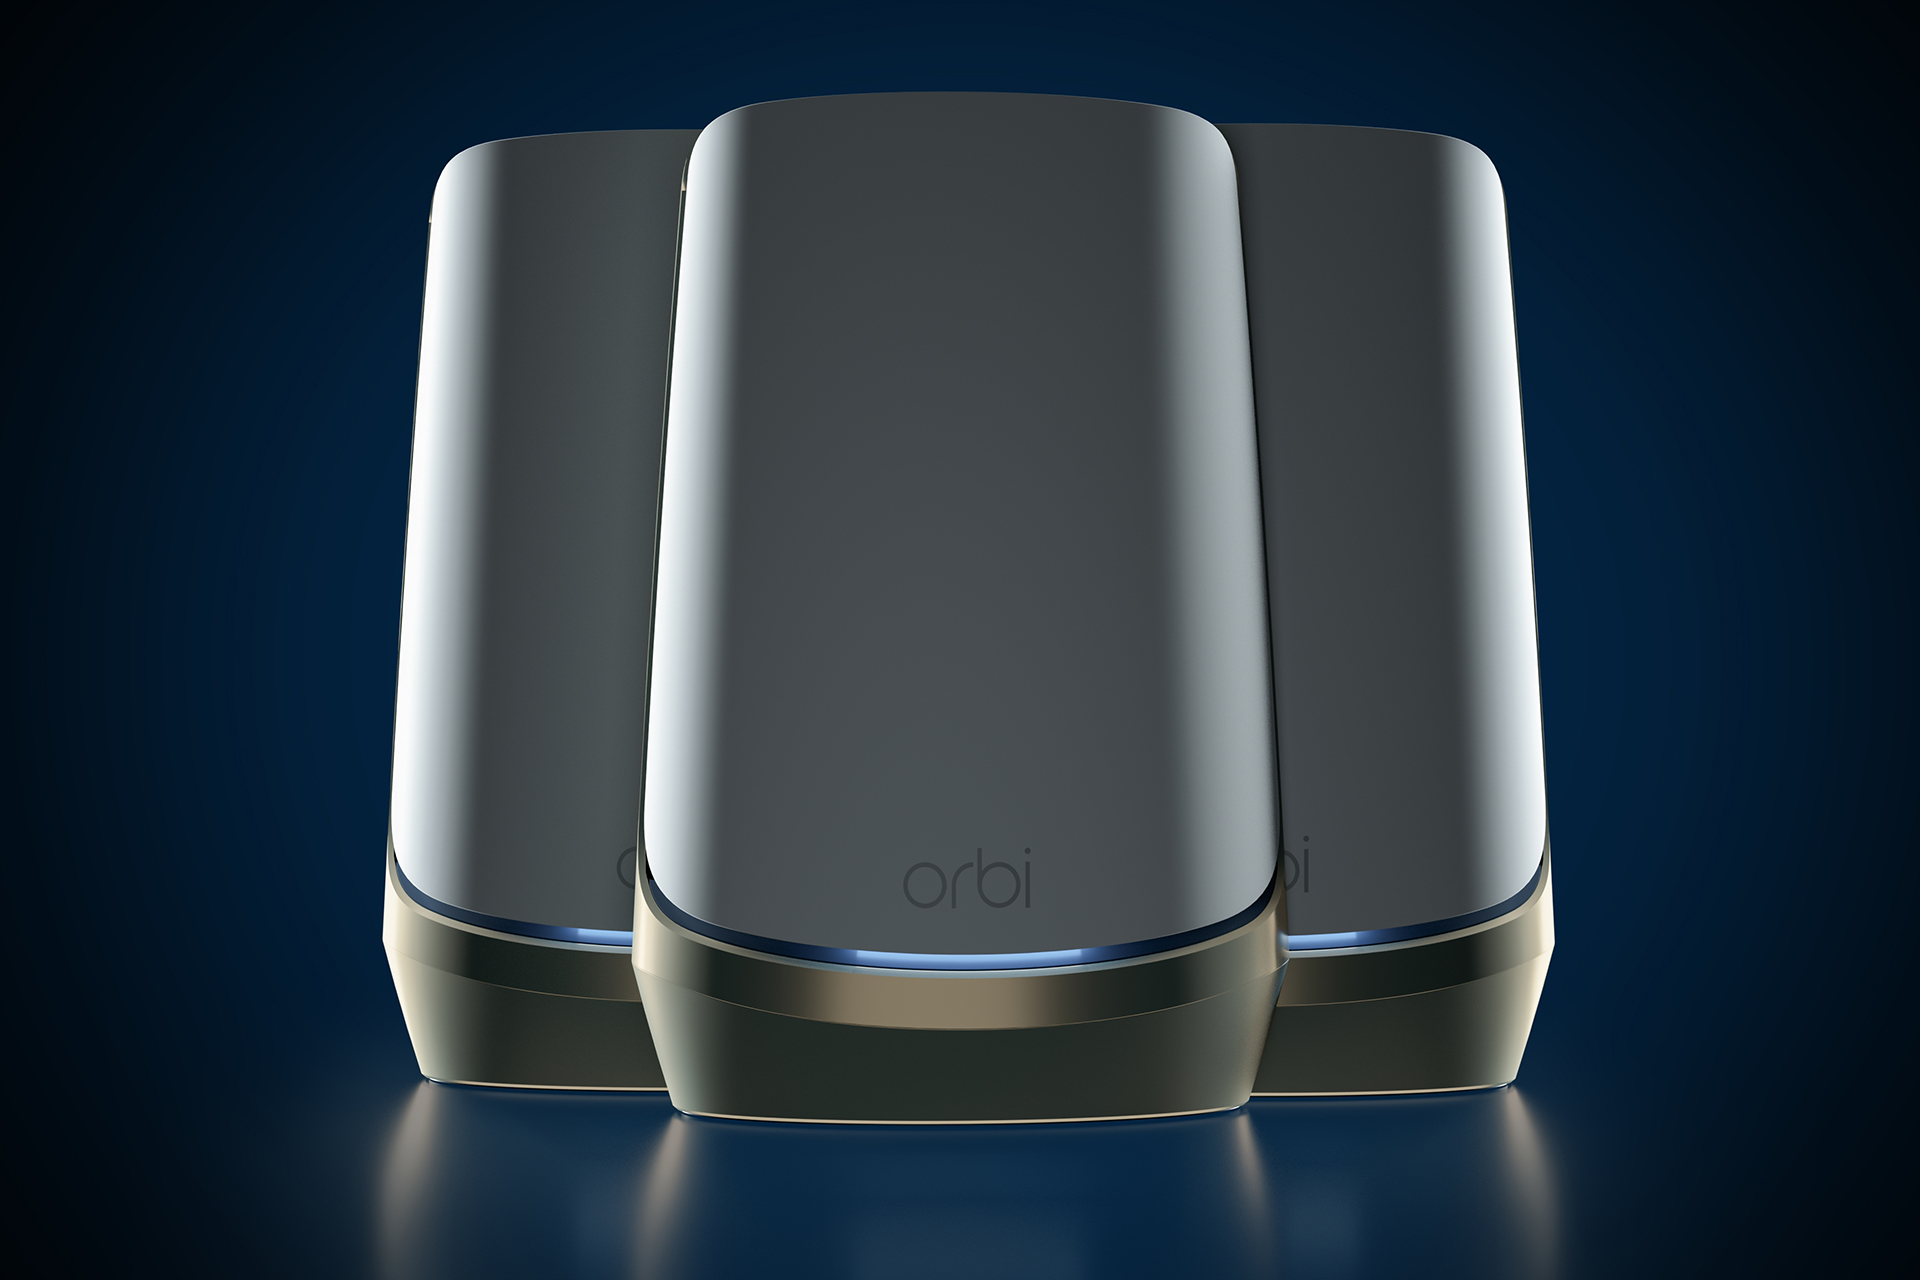 Netgear’s quad-band WiFi 6E mesh router will arena you reduction $1,500